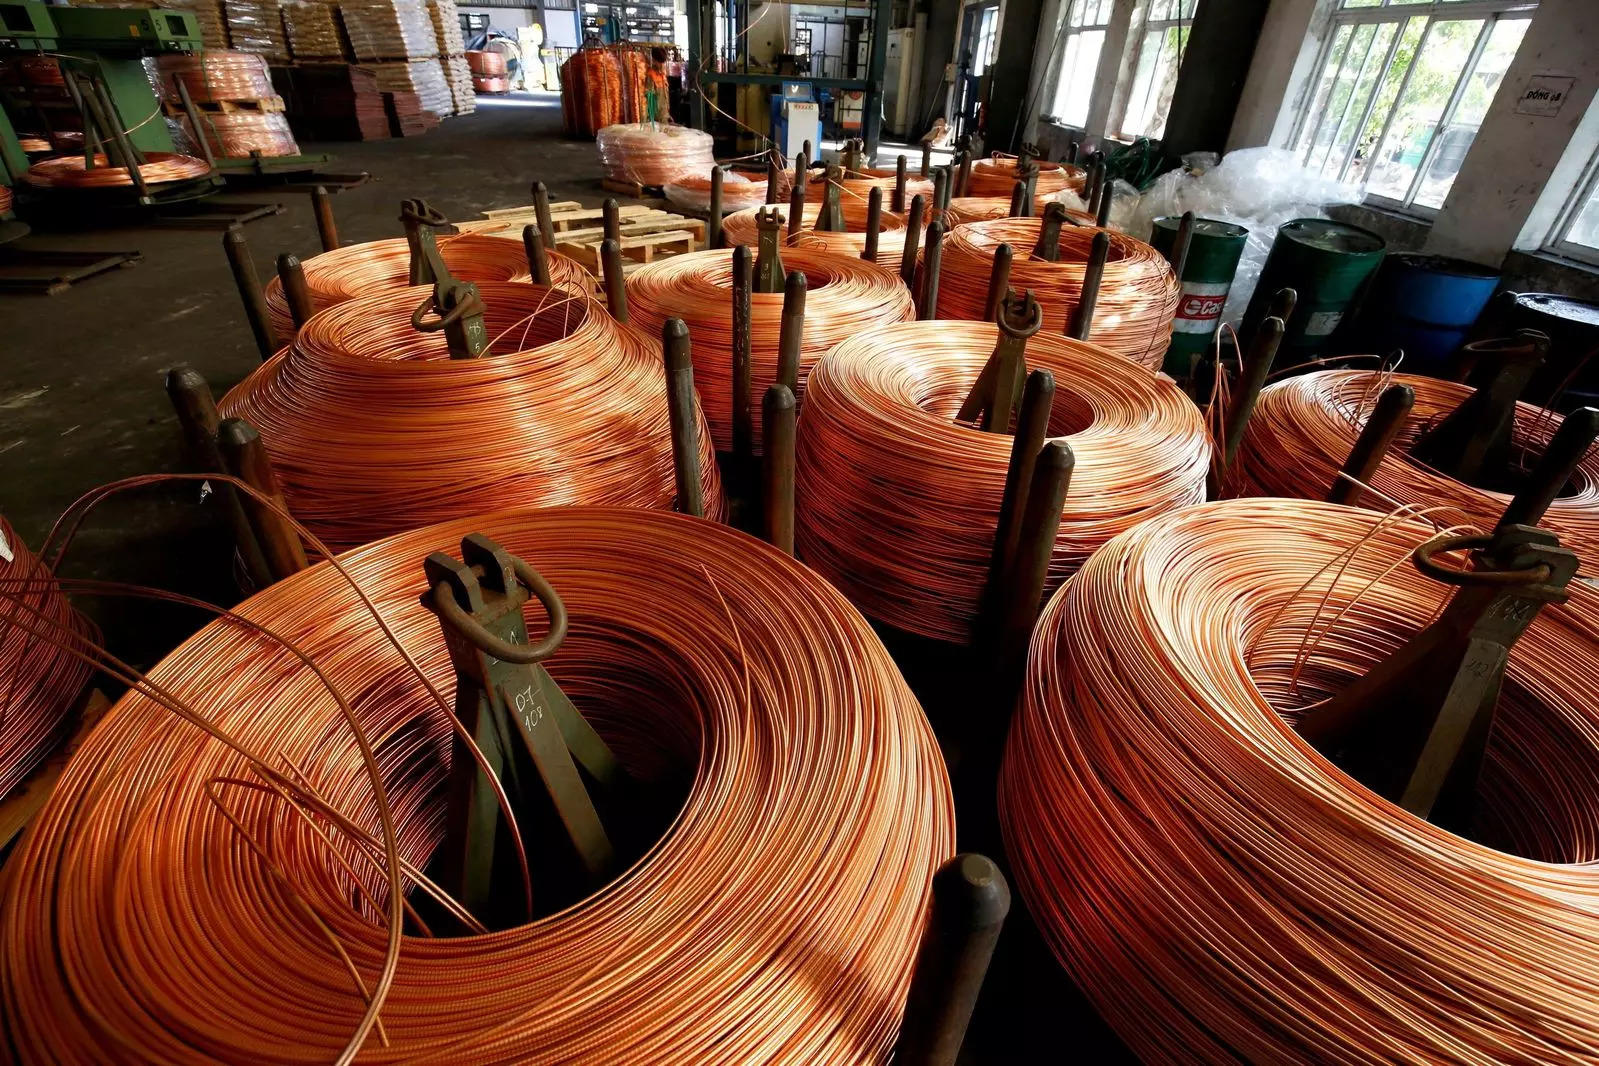 The introduction of investors into the physical supply chain was so controversial last time around that copper consumers ended up taking the Securities and Exchange Commission (SEC) to court for its approval of two big copper products. In the end neither made it off the drawing-board and other investment attempts to get physical with the industrial metals markets fizzled out.